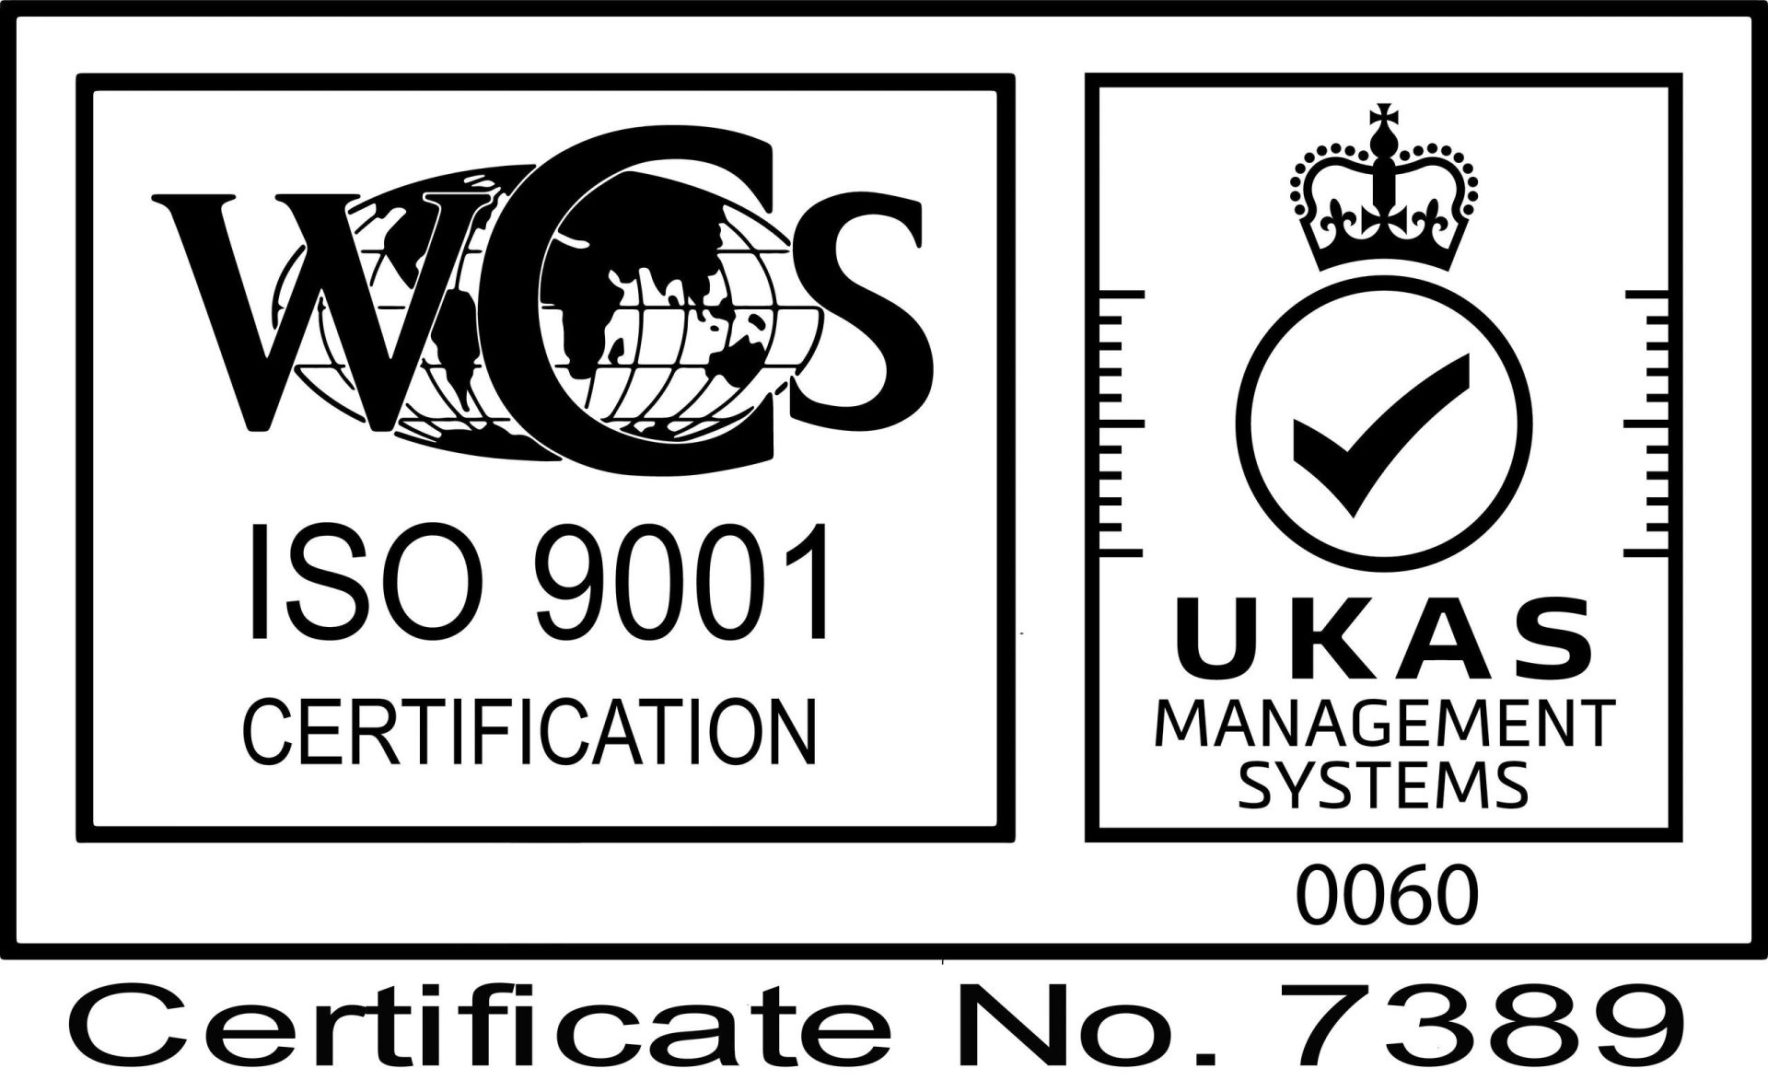 Wcs iso 9001 management systems certification.